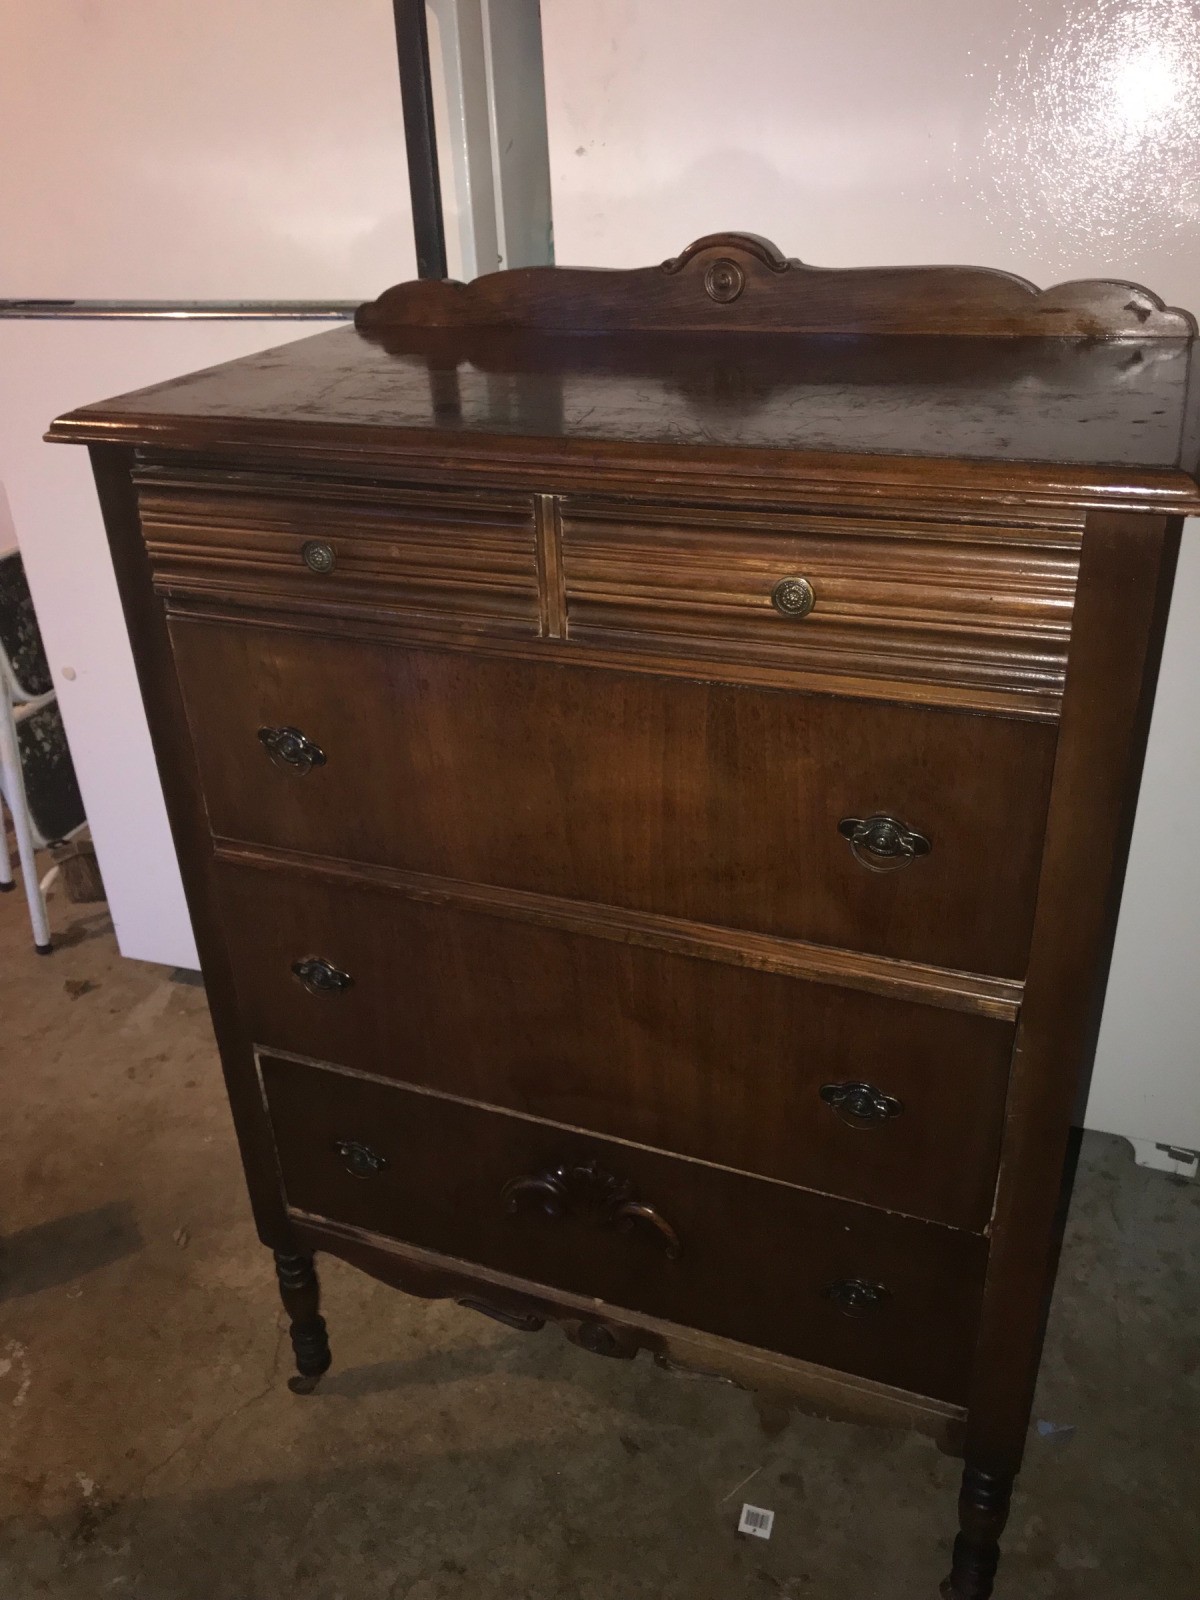 Finding The Value Of Antique And Vintage Dressers Thriftyfun